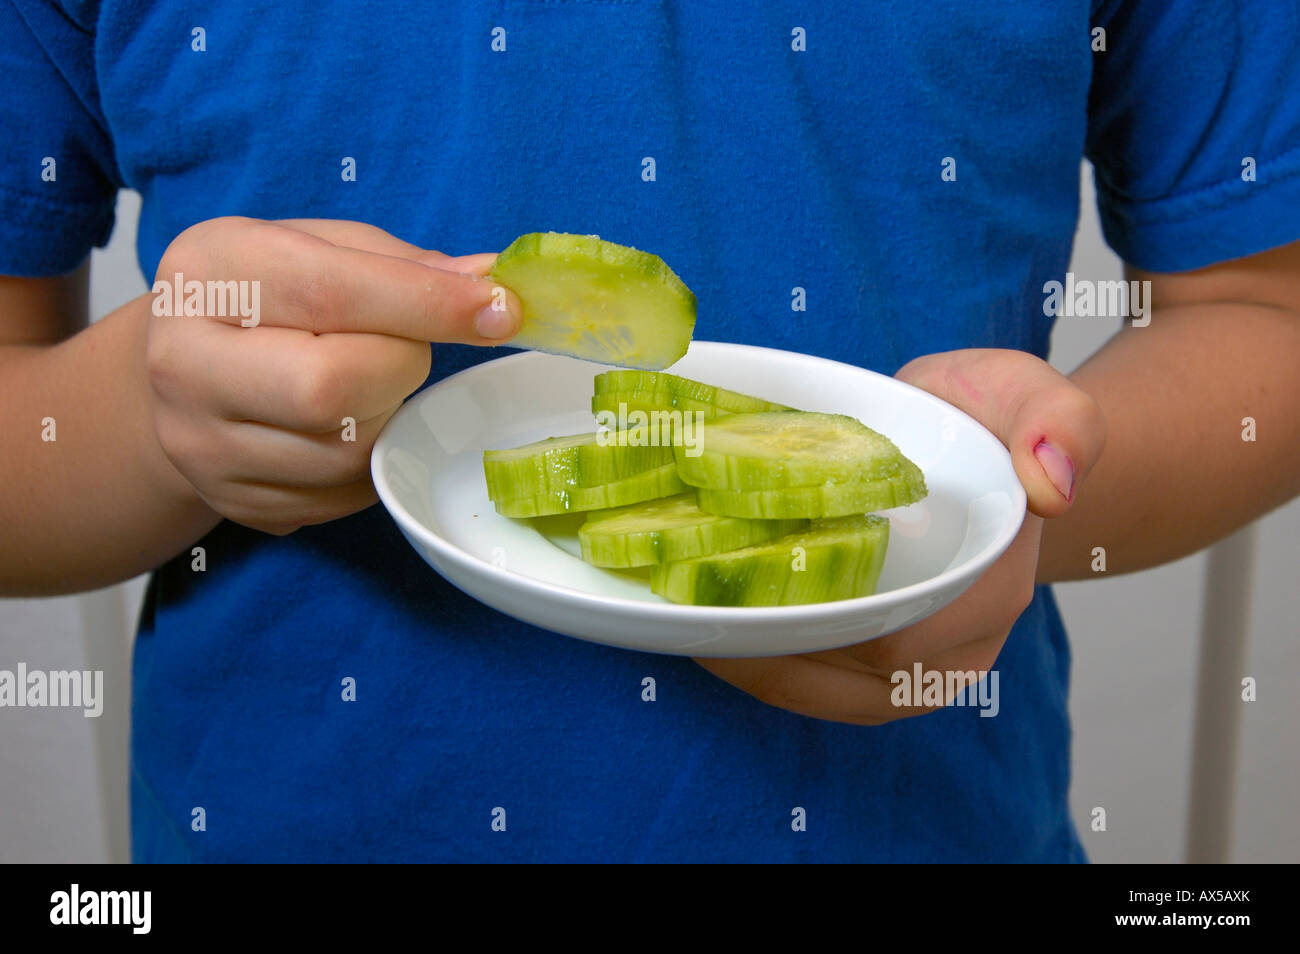 Plate with cucumber slices Stock Photo